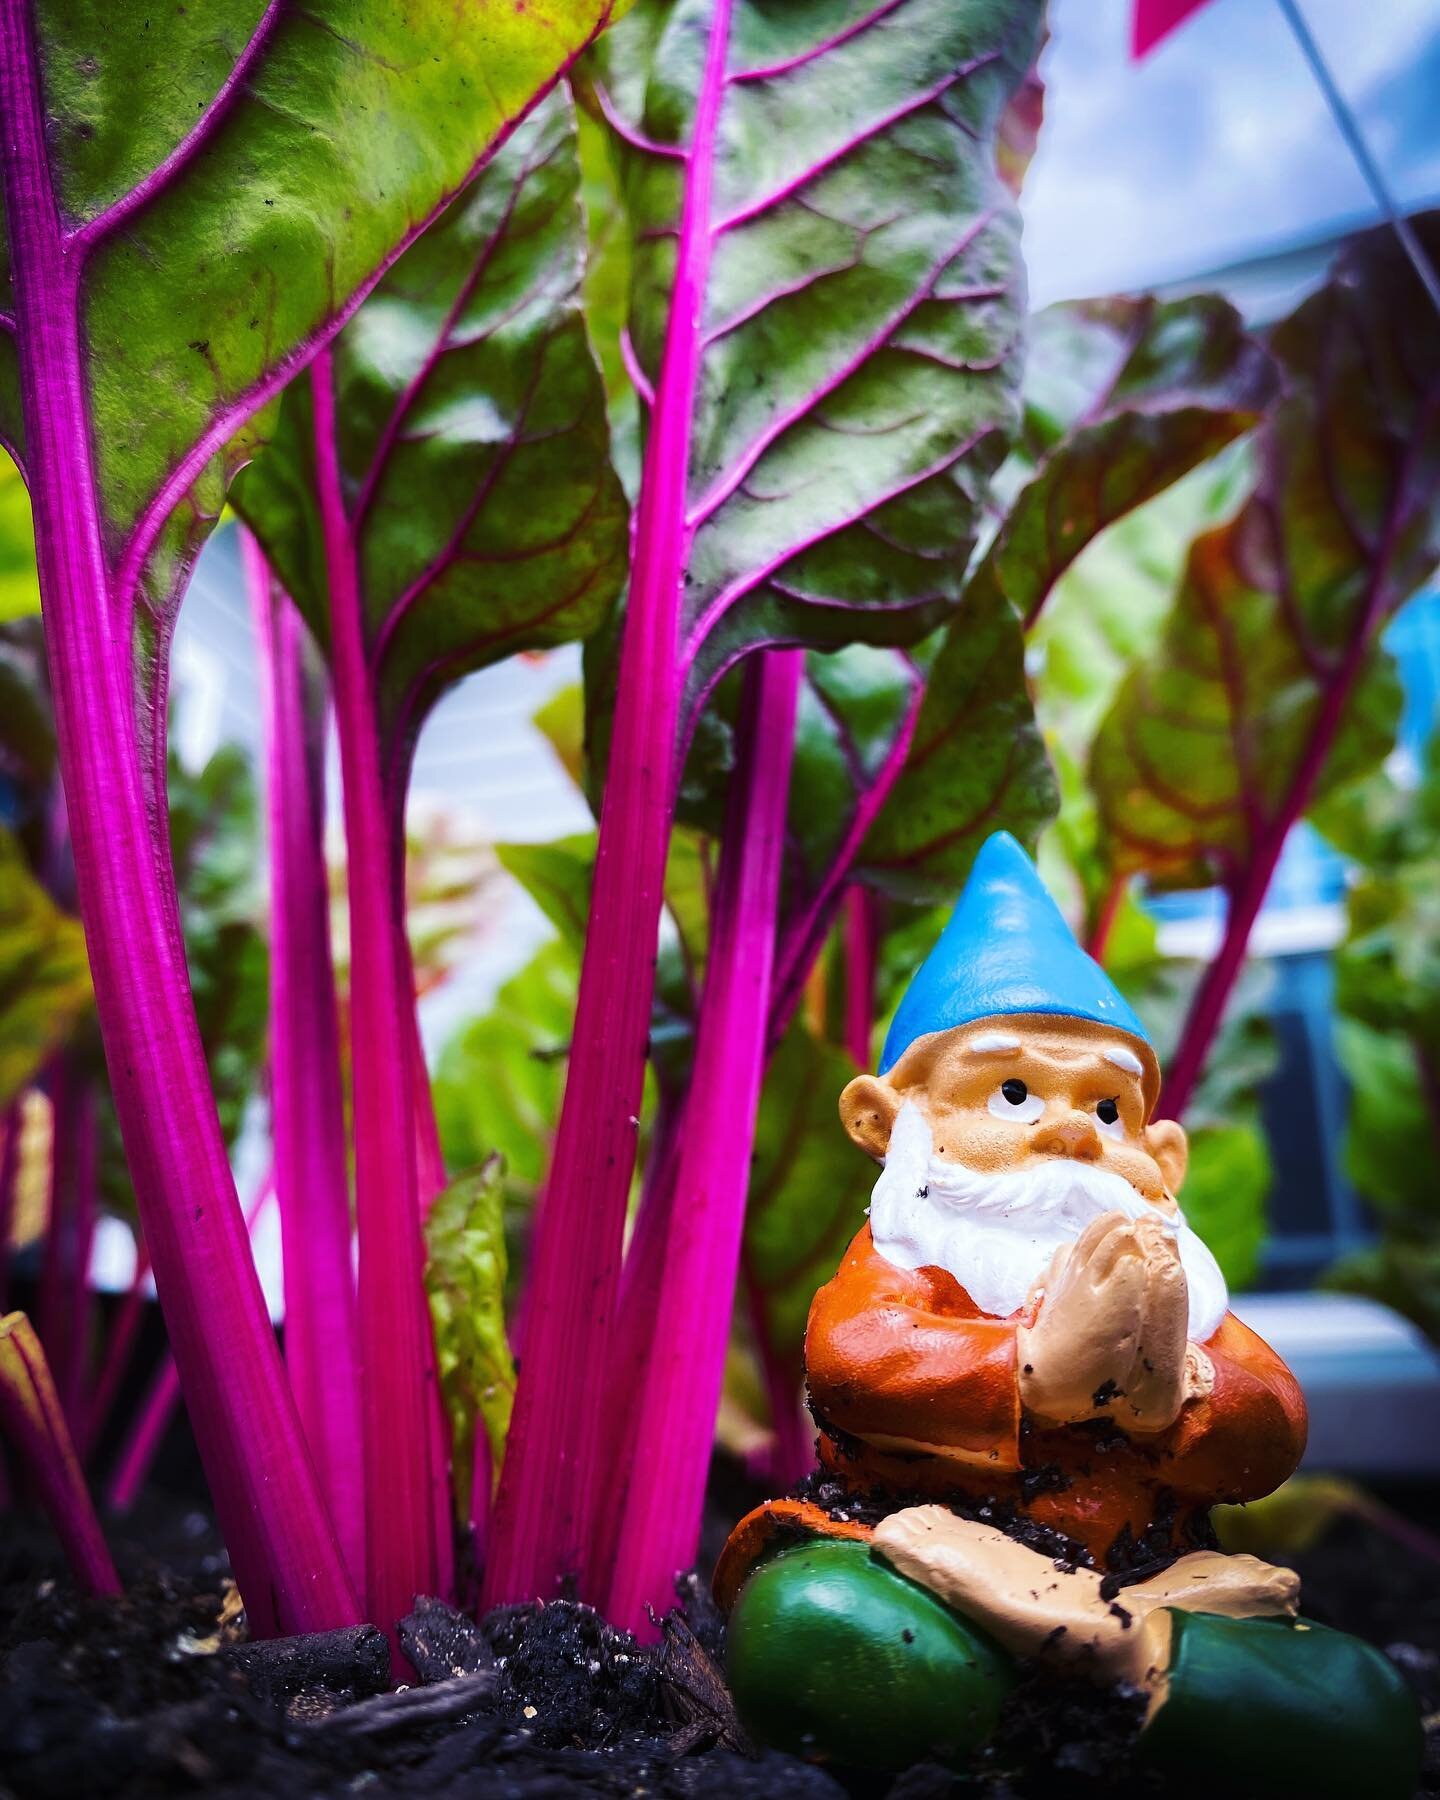 We give thanks everyday for the blessing of you all who support us ❤️ Even our little gnome in the garden 😊. 
.
The farm is cranking and making some awesome moves toward being a bigger supporting pillar to our community of The Grand Strand. We could